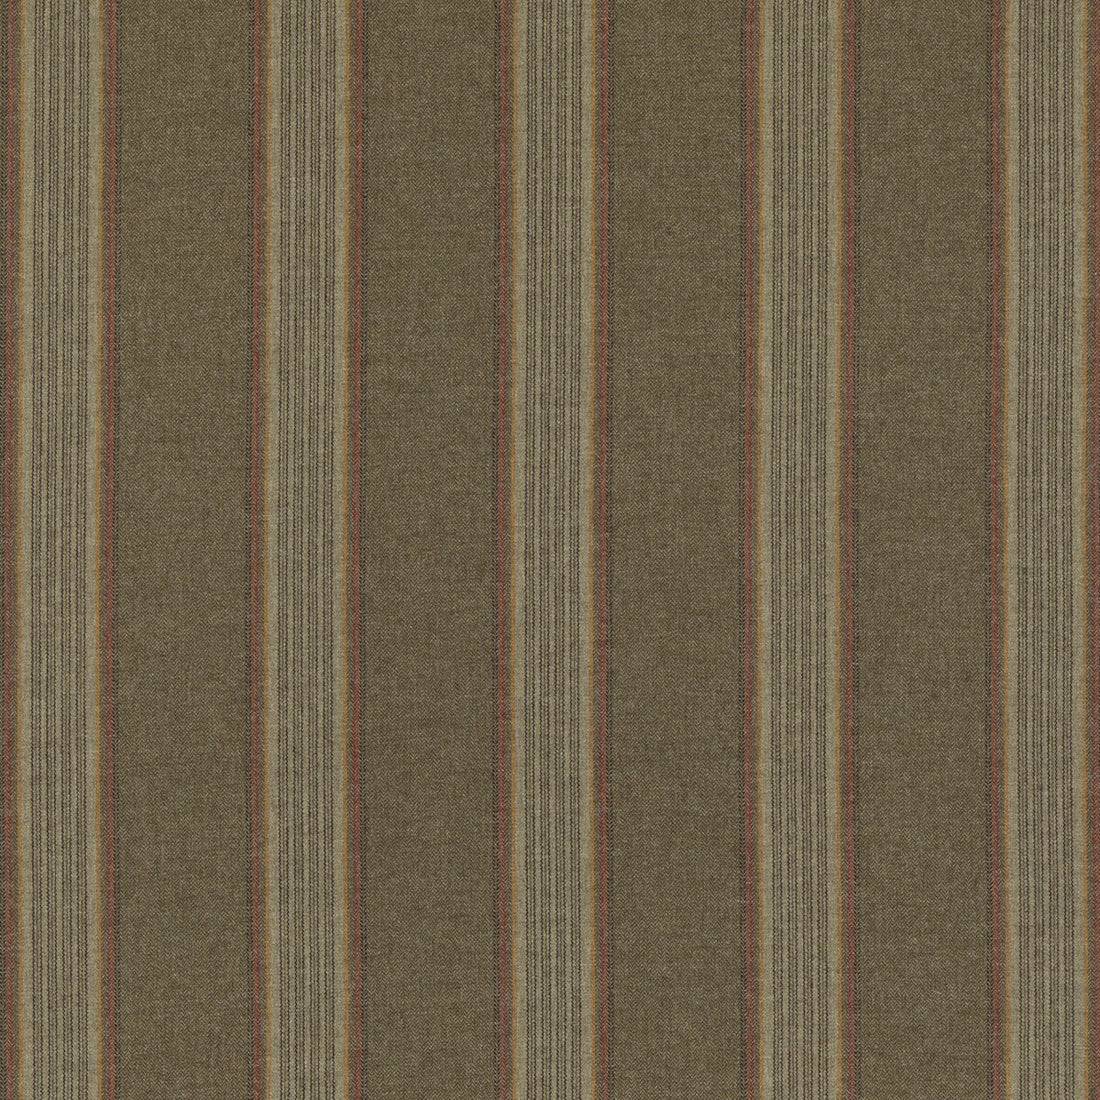 Moray Stripe fabric in lovat color - pattern FD808.R106.0 - by Mulberry in the Mulberry Wools IV collection